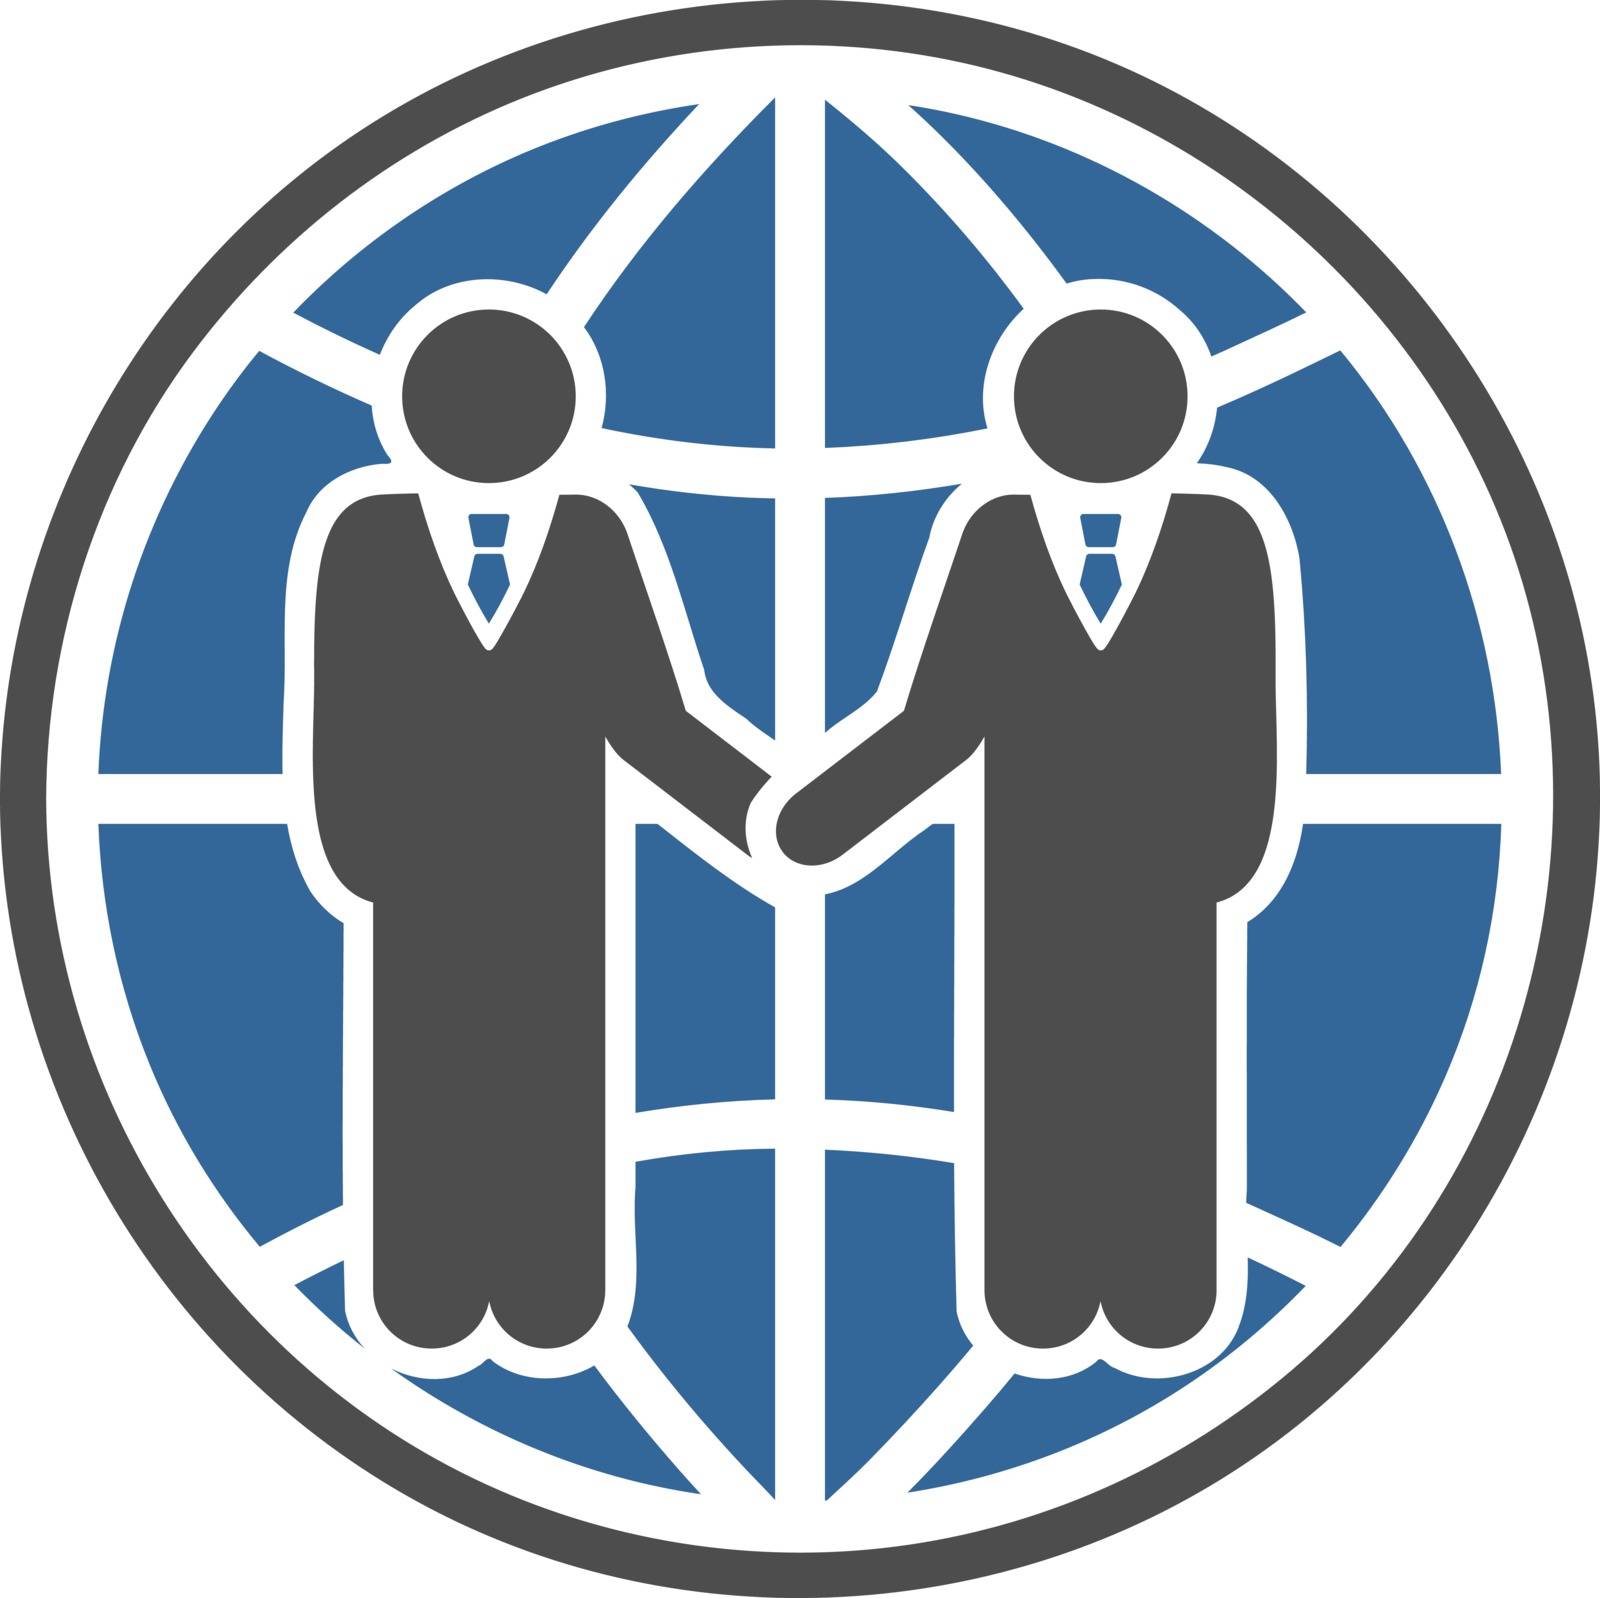 Global partnership icon from Business Bicolor Set by ahasoft